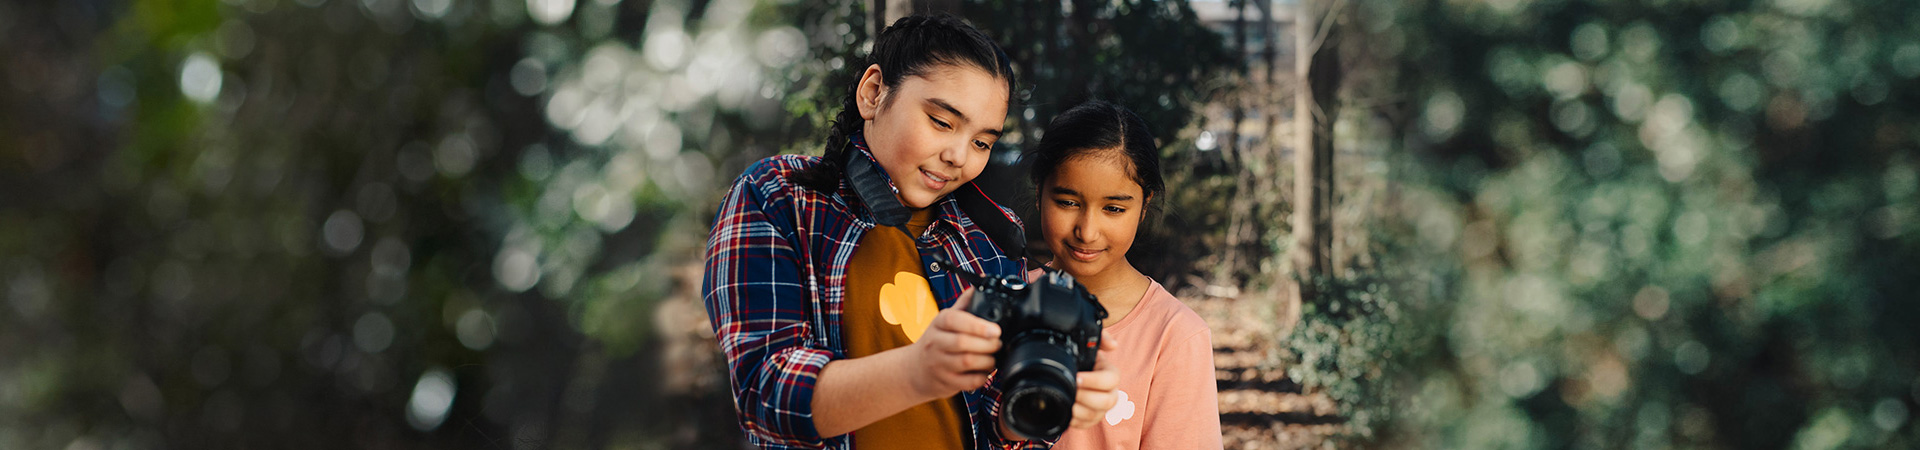  two young girl scouts outside with professional photo camera nature photography 